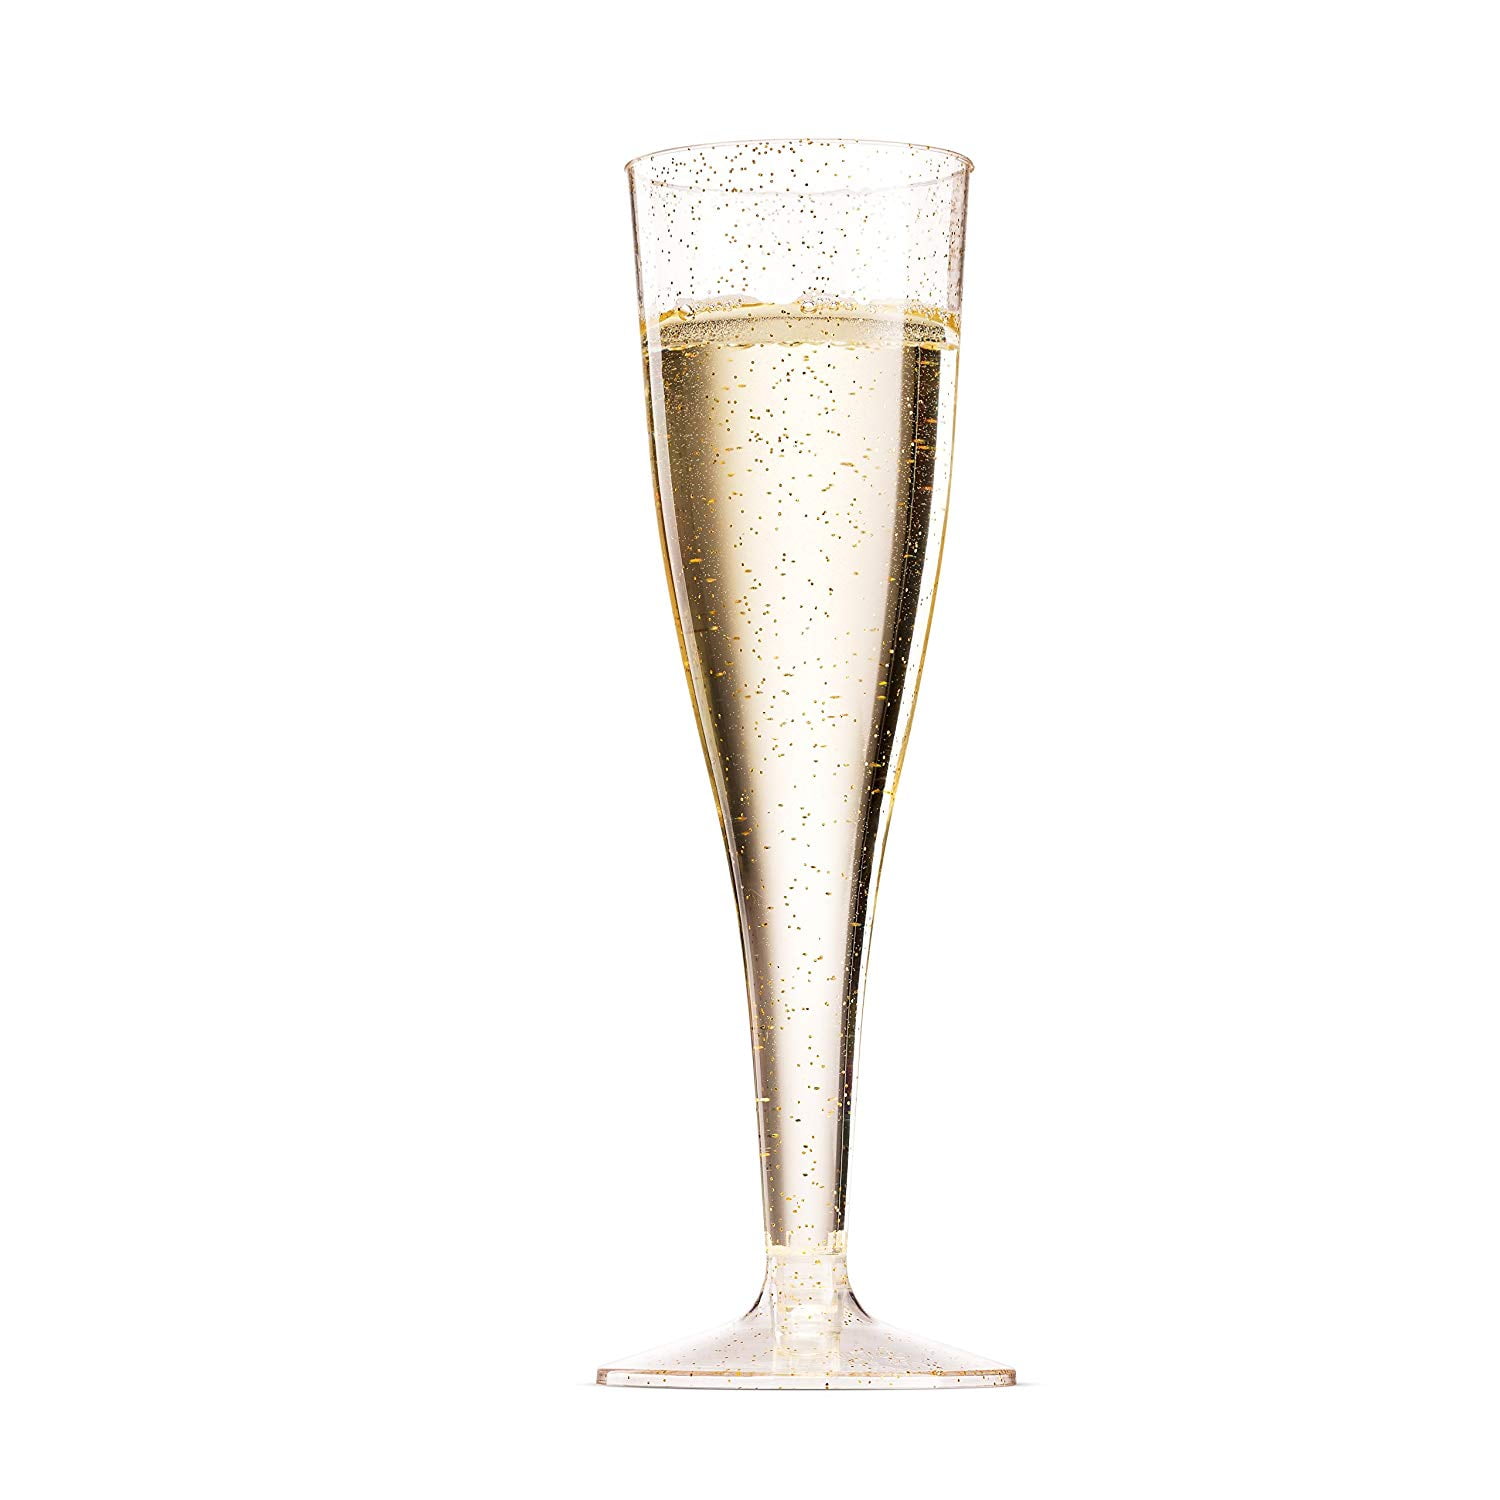  Munfix 50 Pack Gold Rimmed Plastic Champagne Flutes 5 Oz Clear  Plastic Toasting Glasses Fancy Disposable Wedding Party Cocktail Cups with  Gold Rim : Health & Household